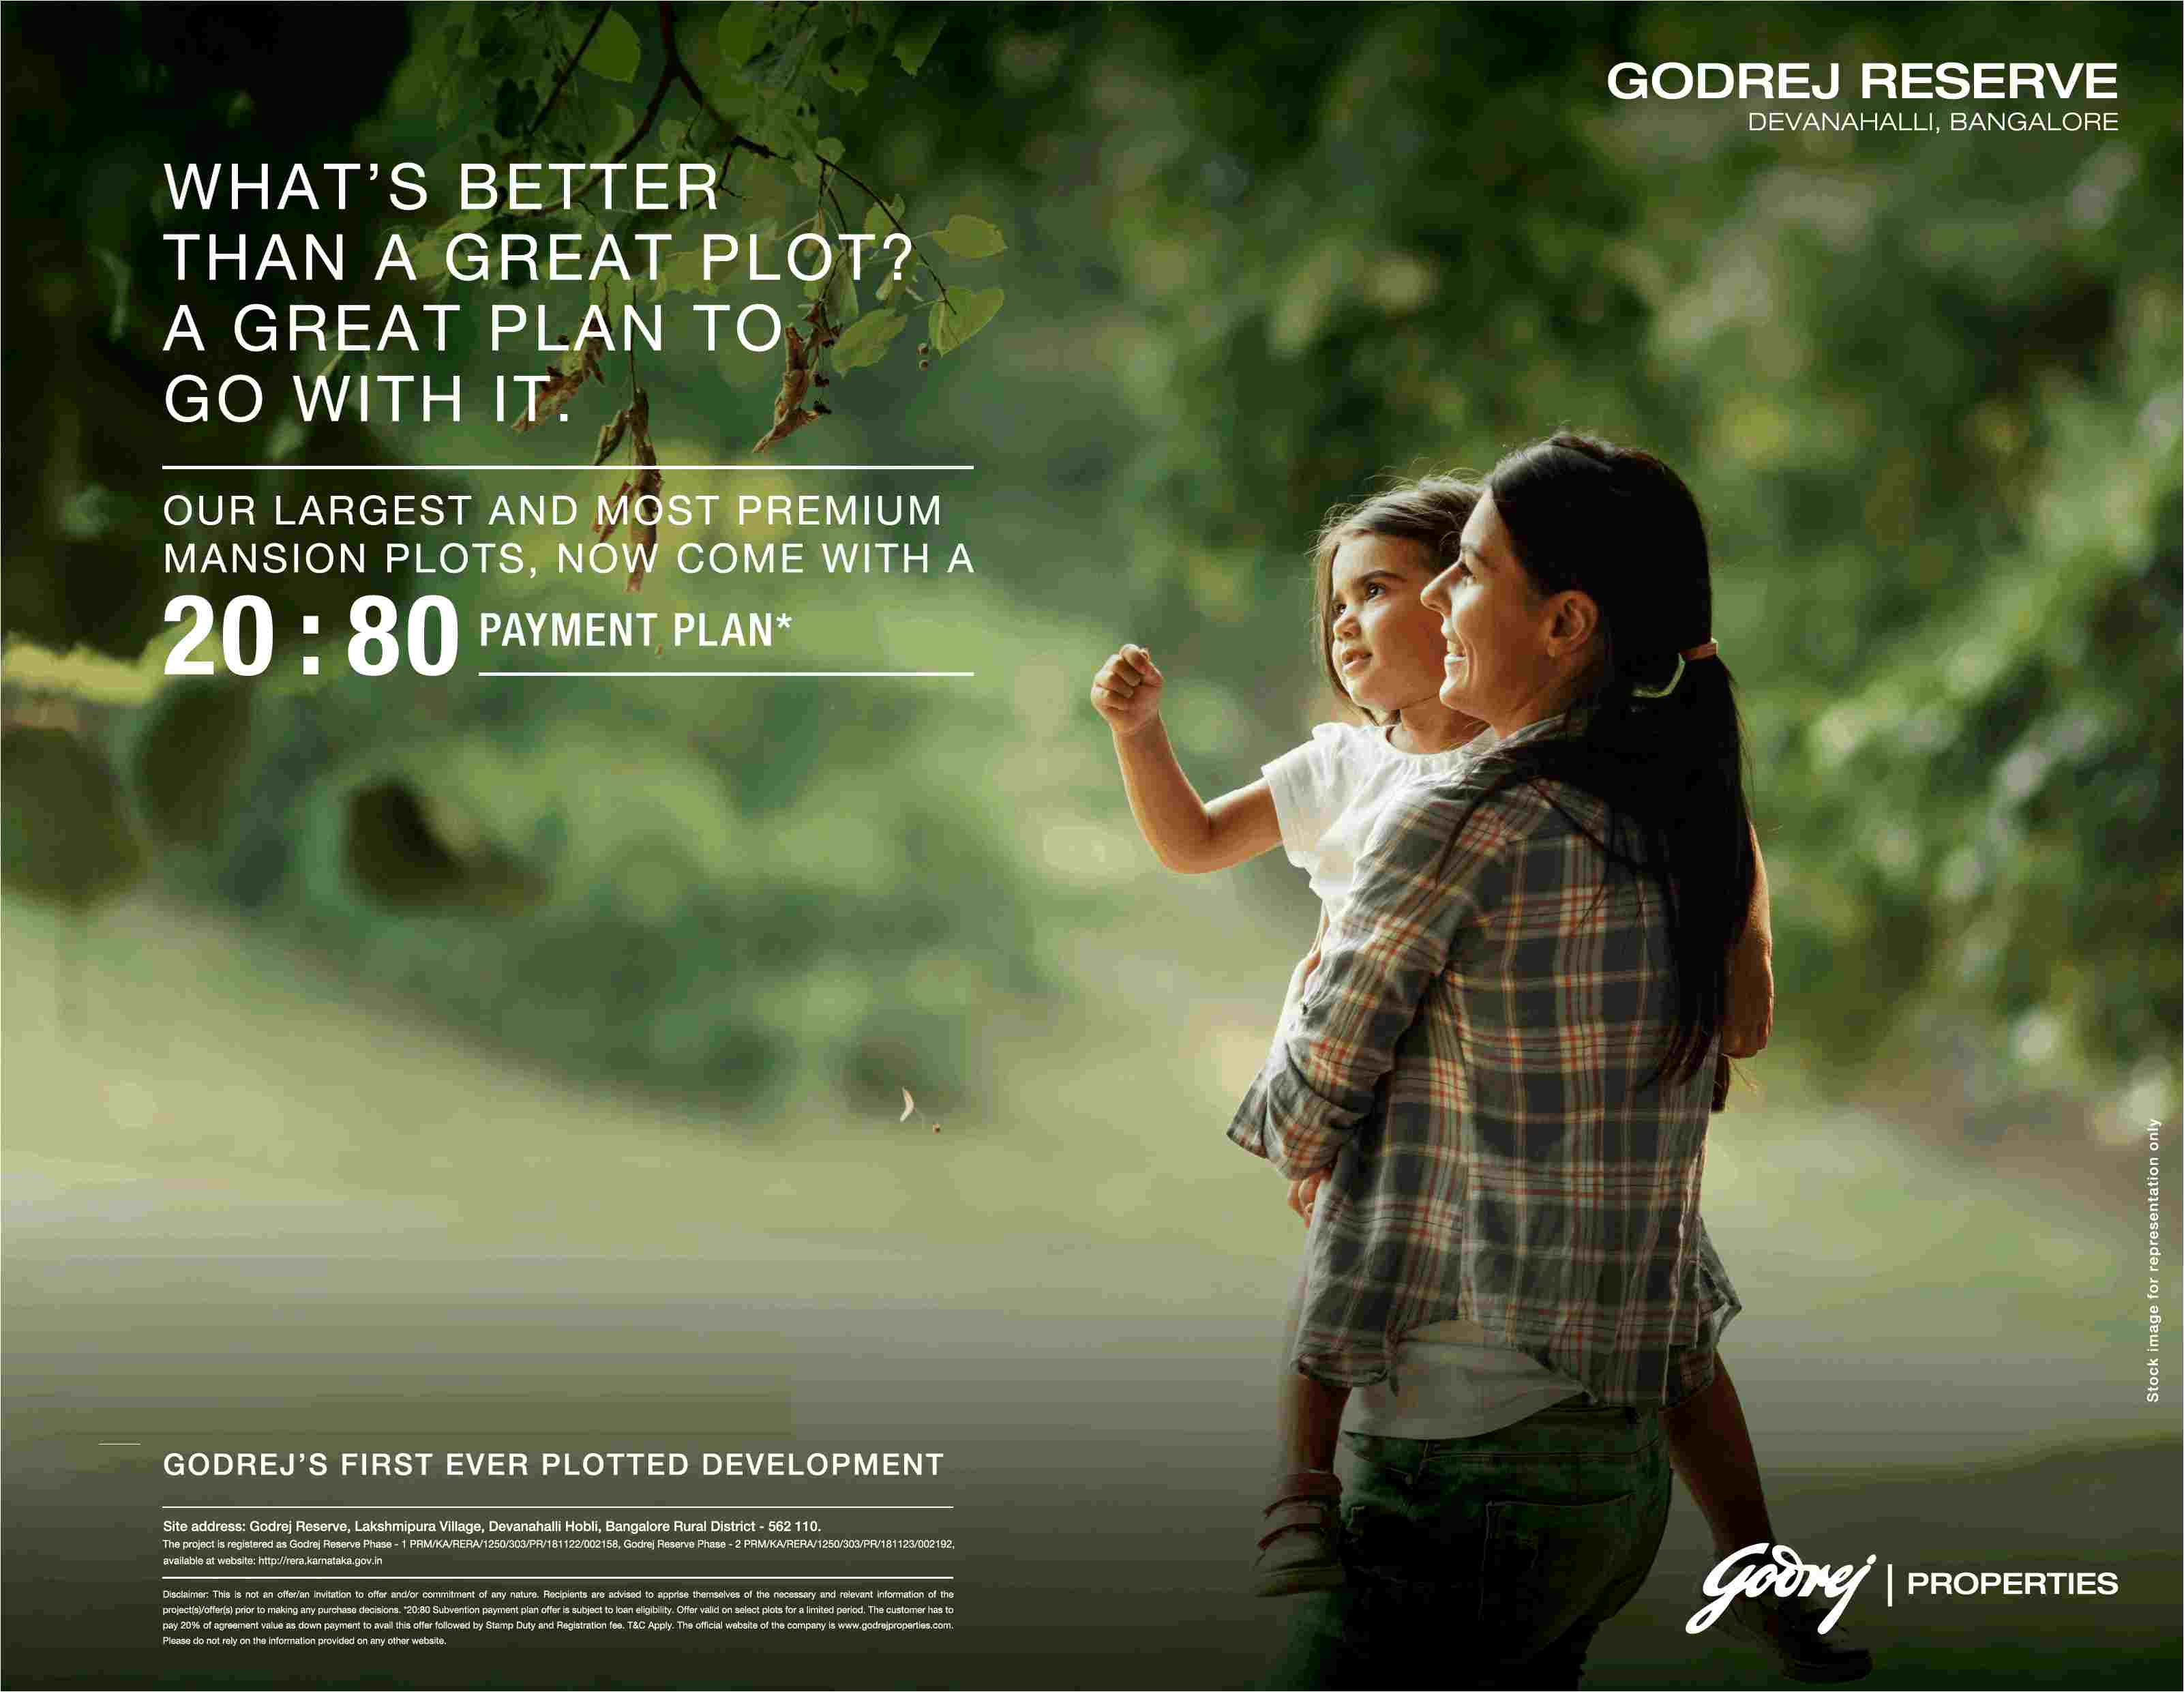 Avail the 20:80 payment plan at Godrej Reserve in Devanahalli, Bangalore